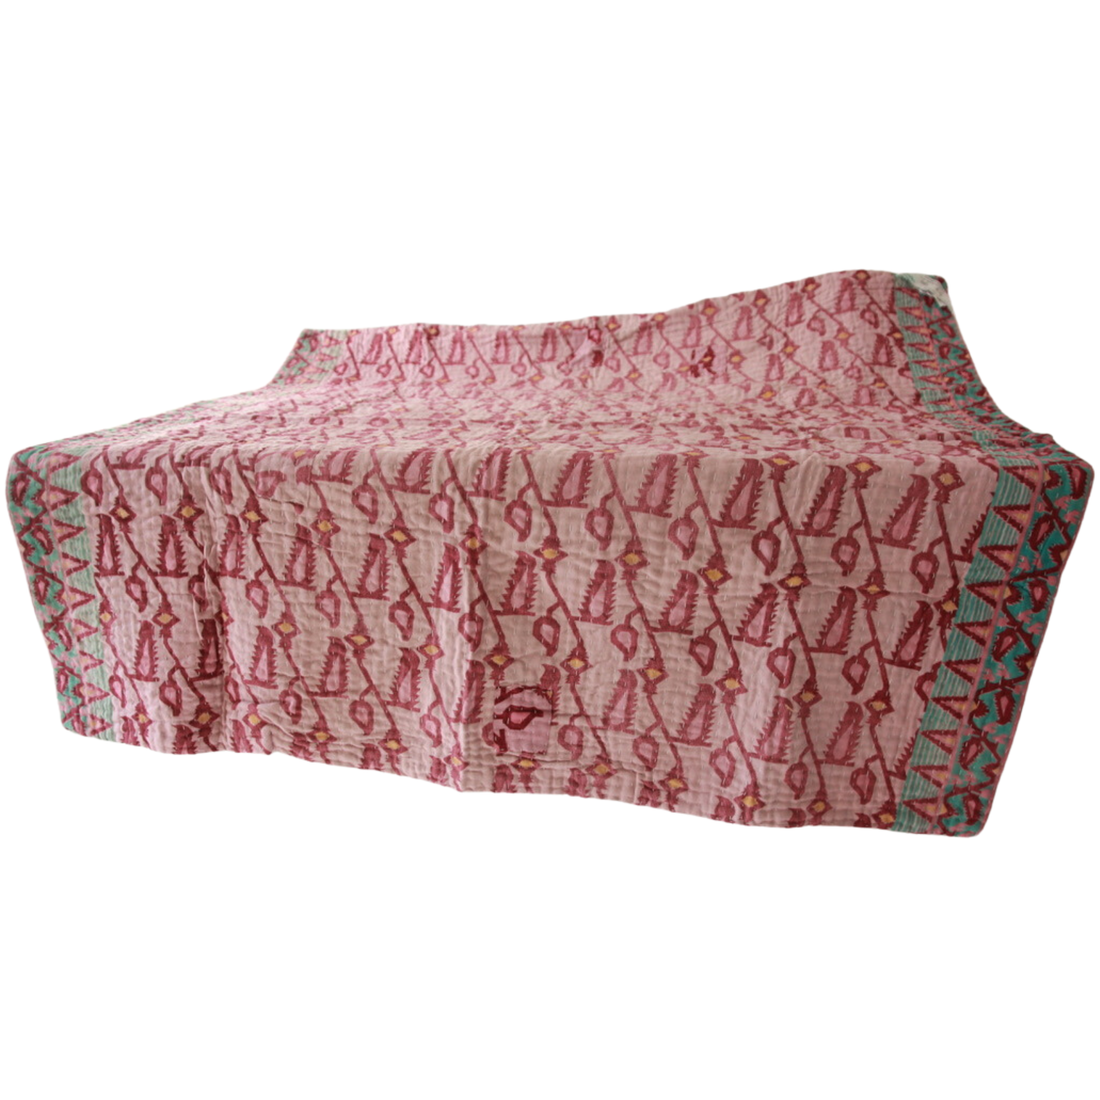 Blankets fair trade ethical sustainable fashion Small Cotton Throw, Baby Blanket - Dusty Pink & Wine conscious purchase Basha